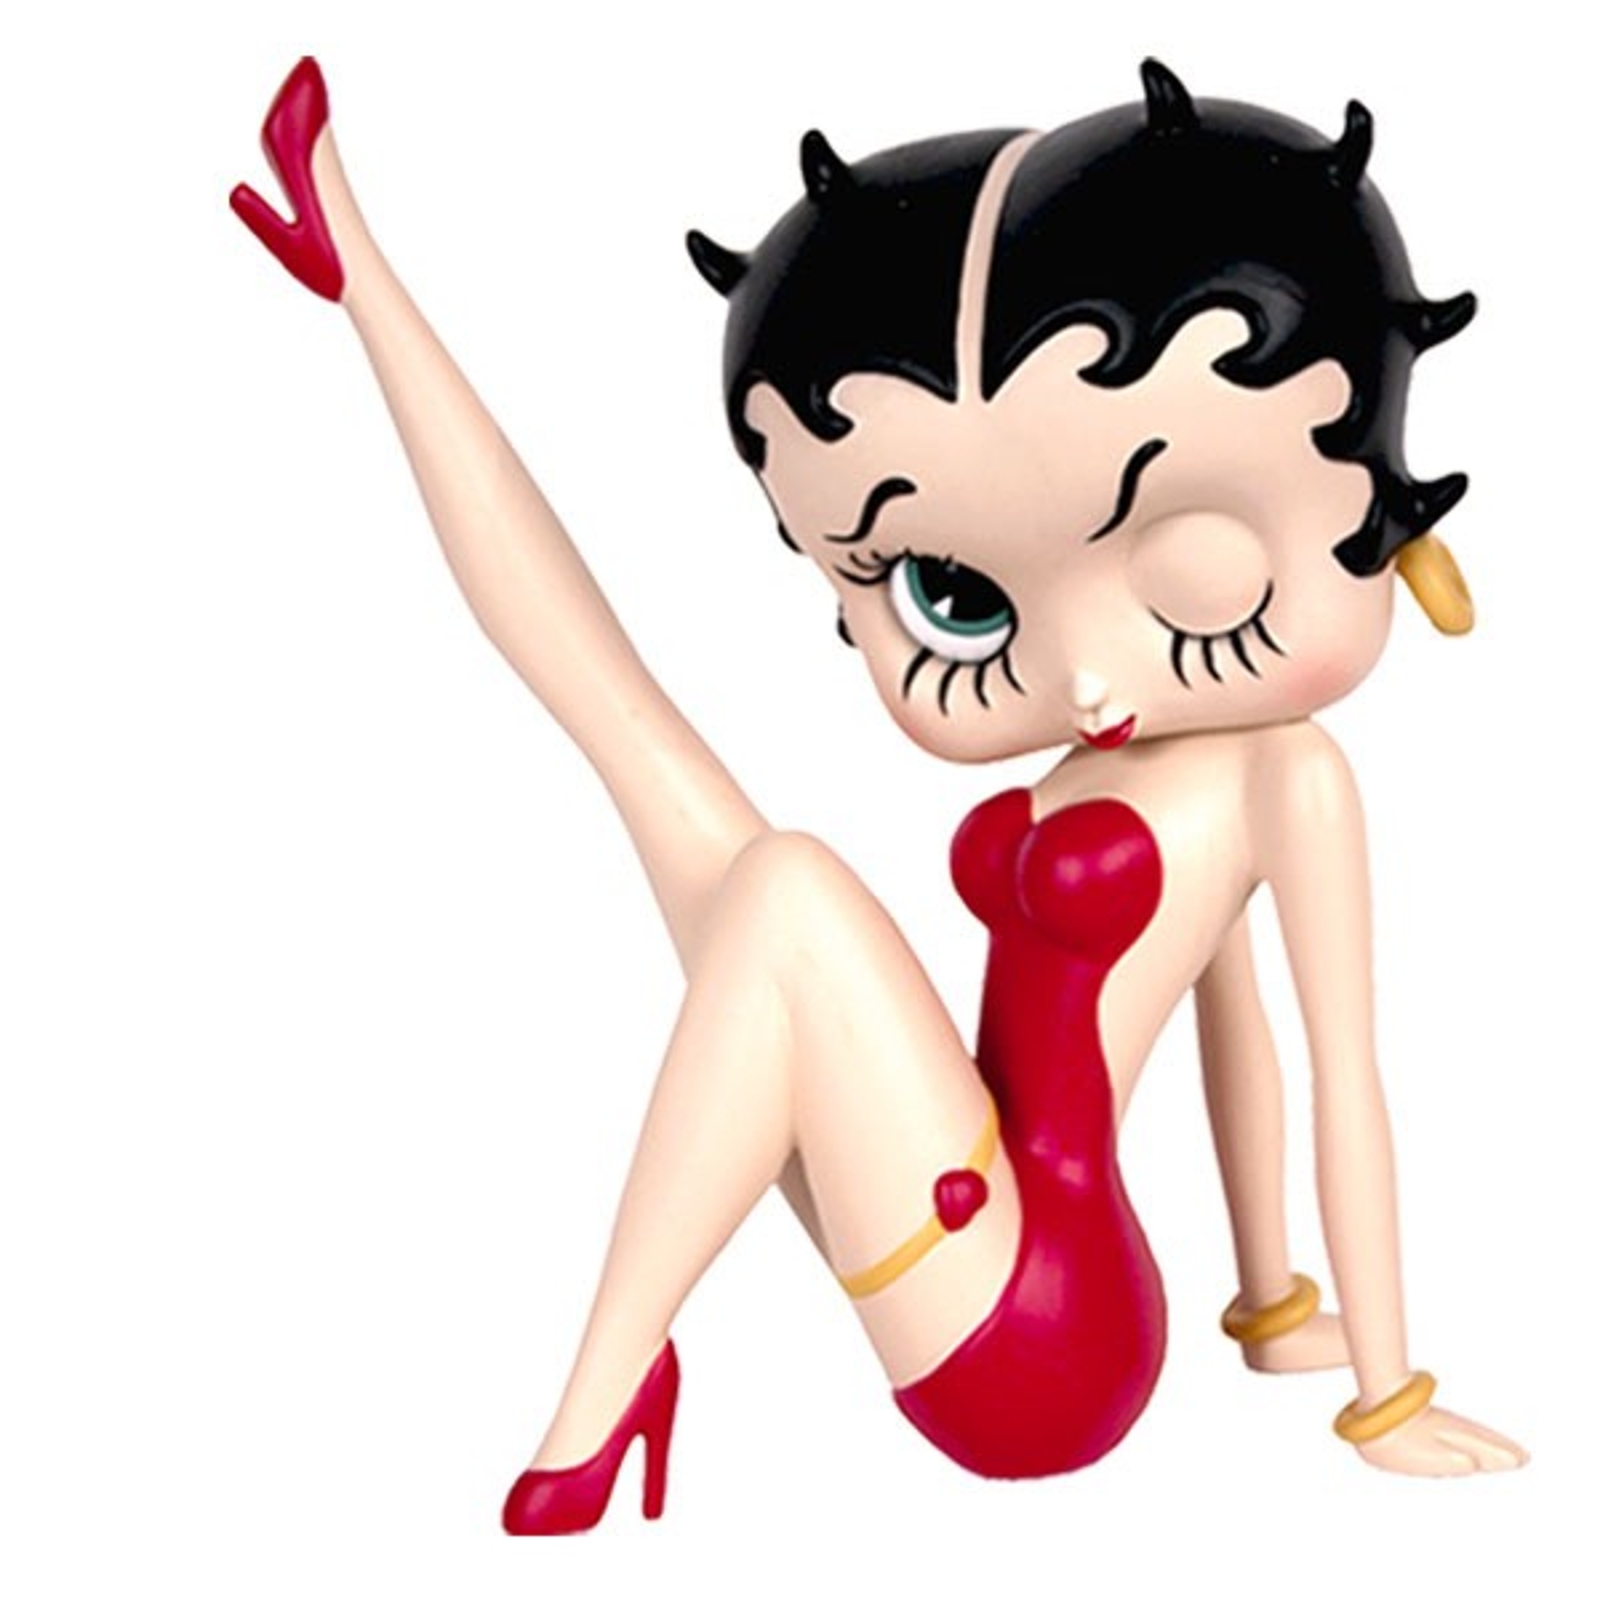 Buy Betty Boop Collectable Figurine with Leg Up in a Red Dress from Polkado...